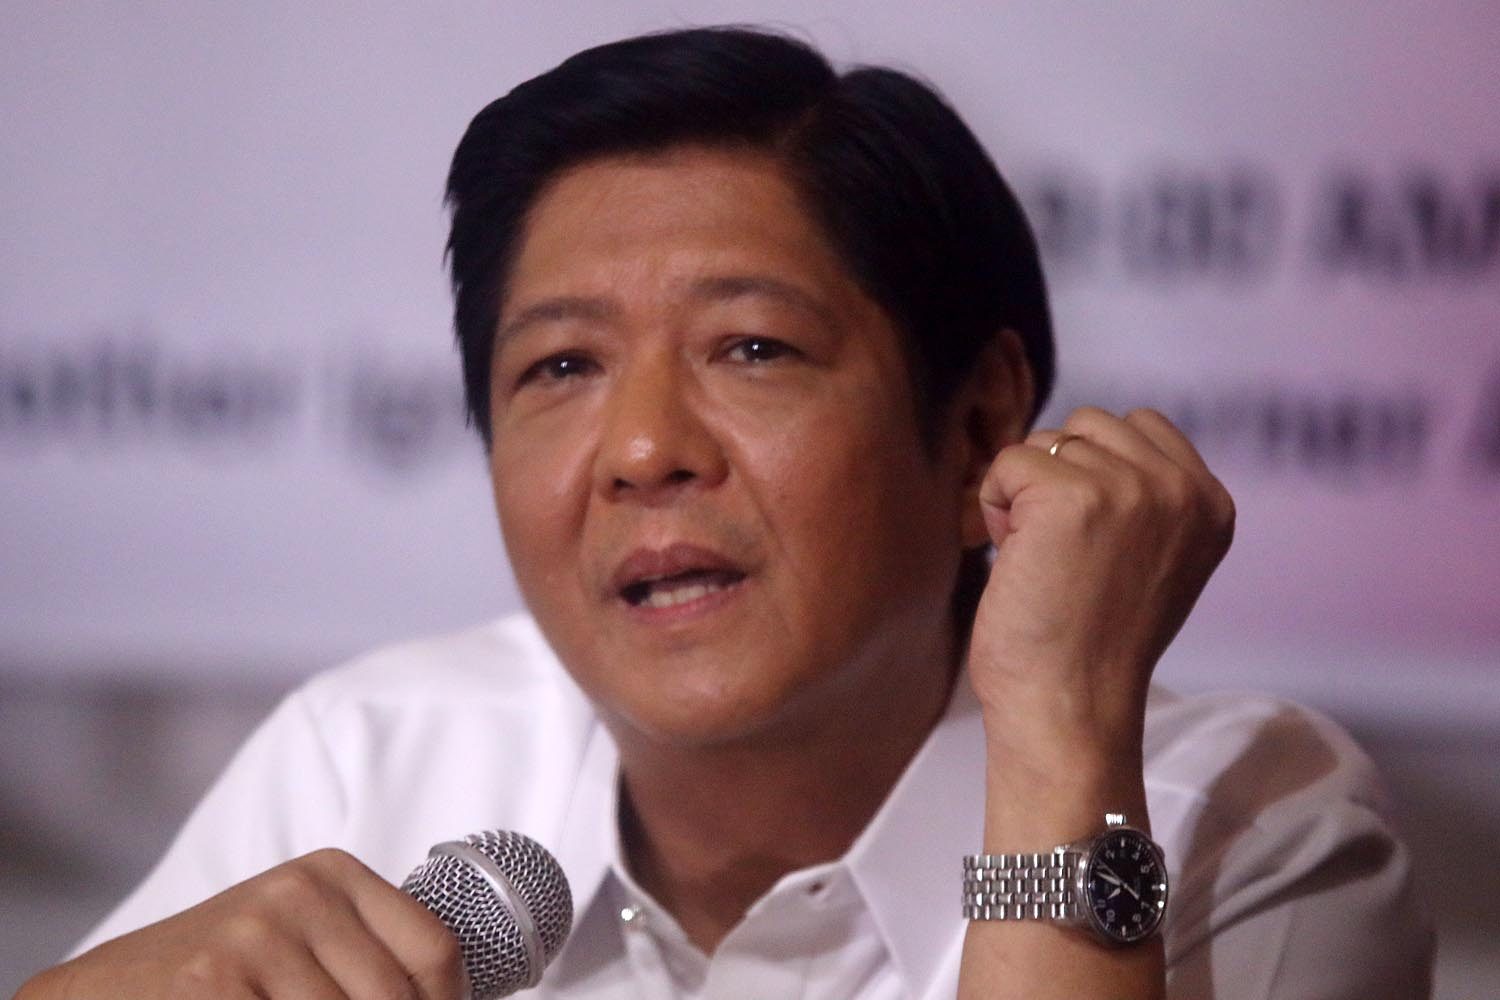 Bongbong Marcos to ‘move on’ critics: ‘What else do you want to do?’